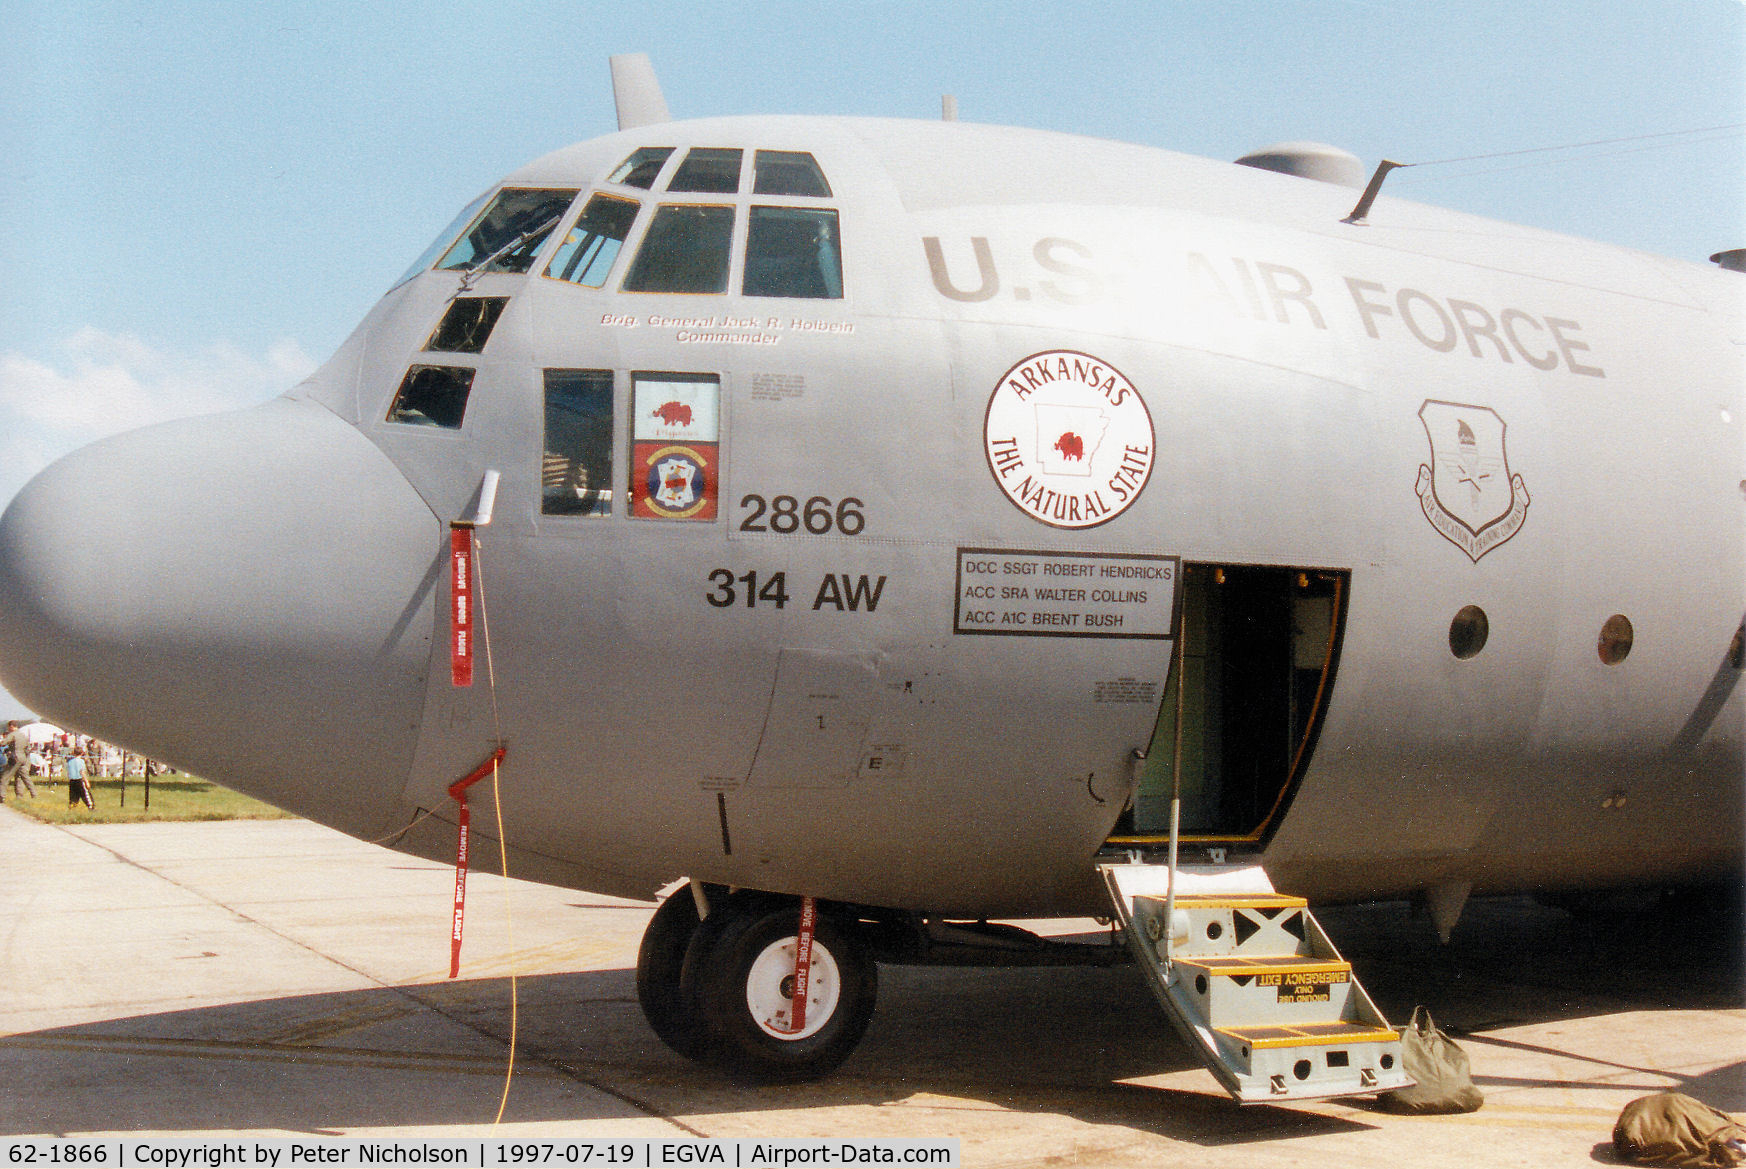 62-1866, 1962 Lockheed C-130E Hercules C/N 382-3830, C-130E Hercules, callsign Wang 23, of 53rd Airlift Squadron/314th Airlift Wing at Little Rock AFB on display at the 1997 Intnl Air Tattoo at RAF Fairford.